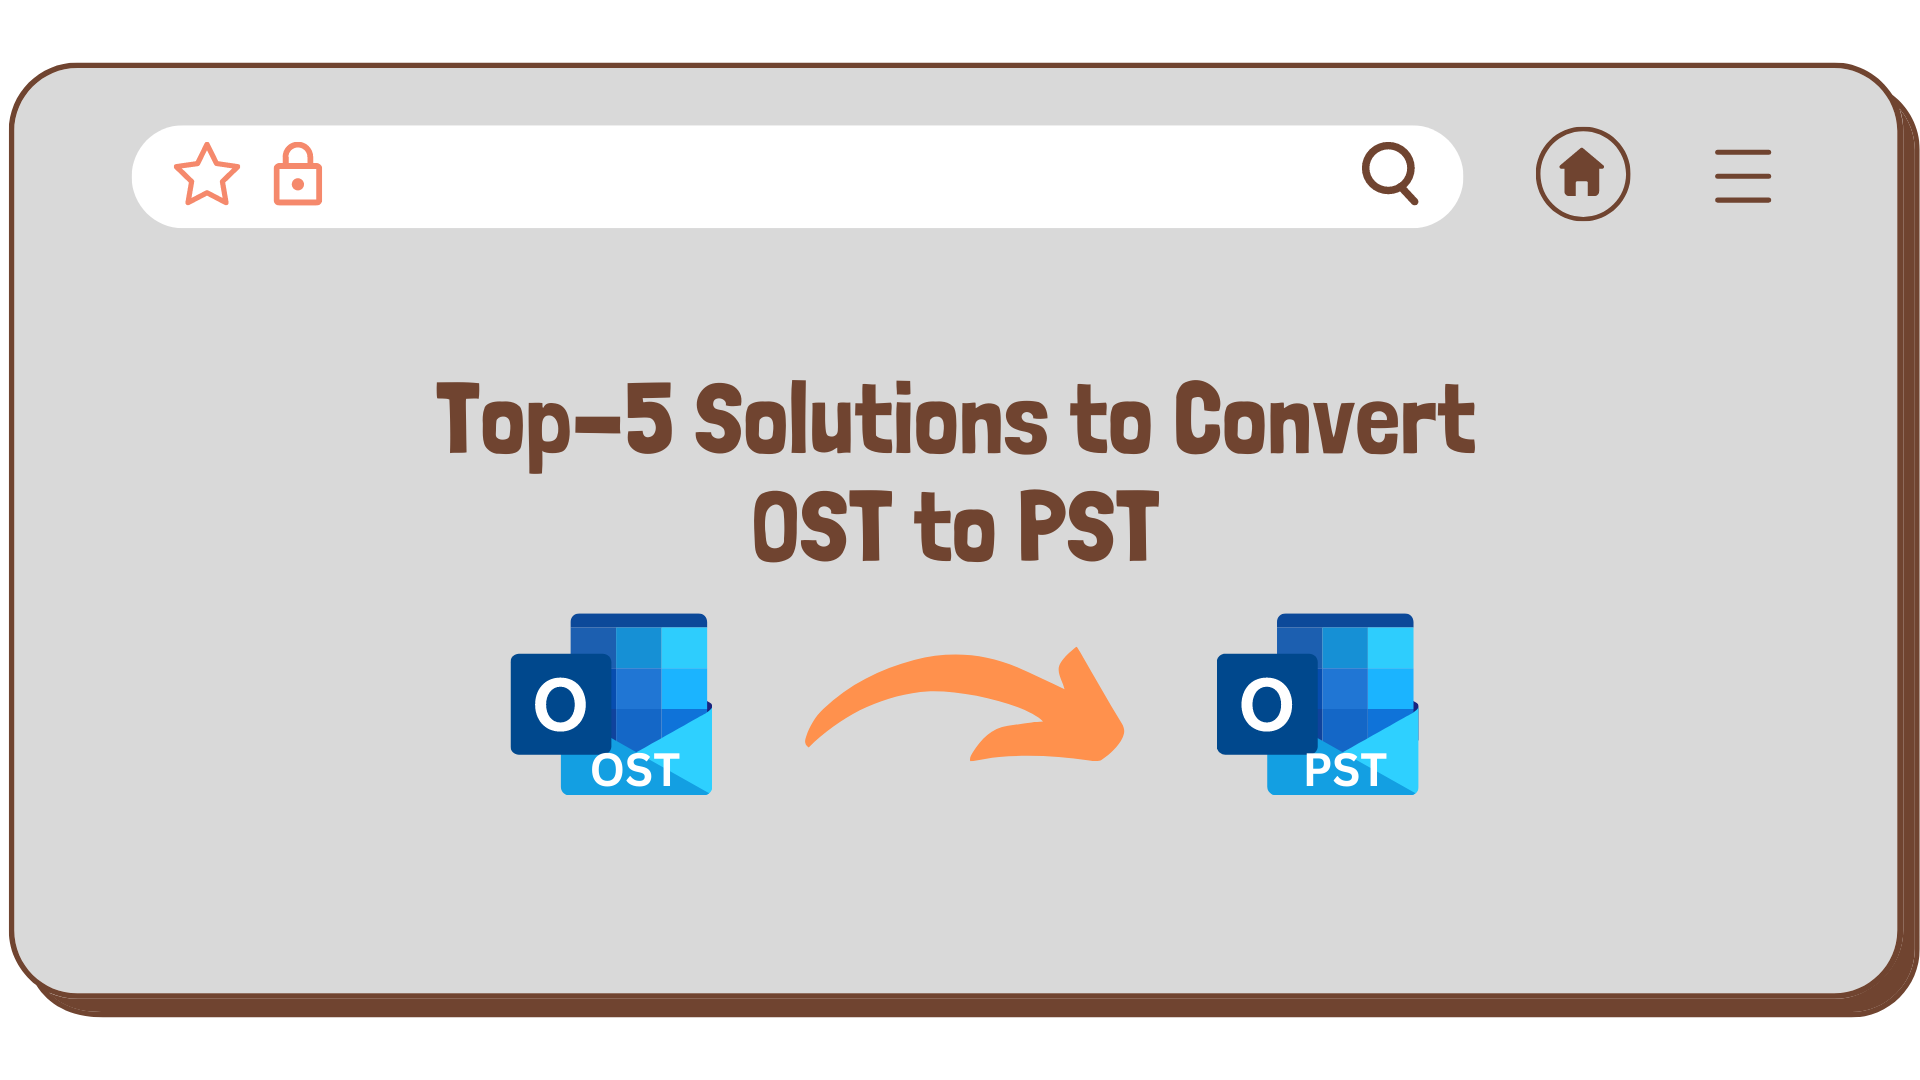 Q ® =

Top=>S Solutions to Convert
OST to PST

ot oo